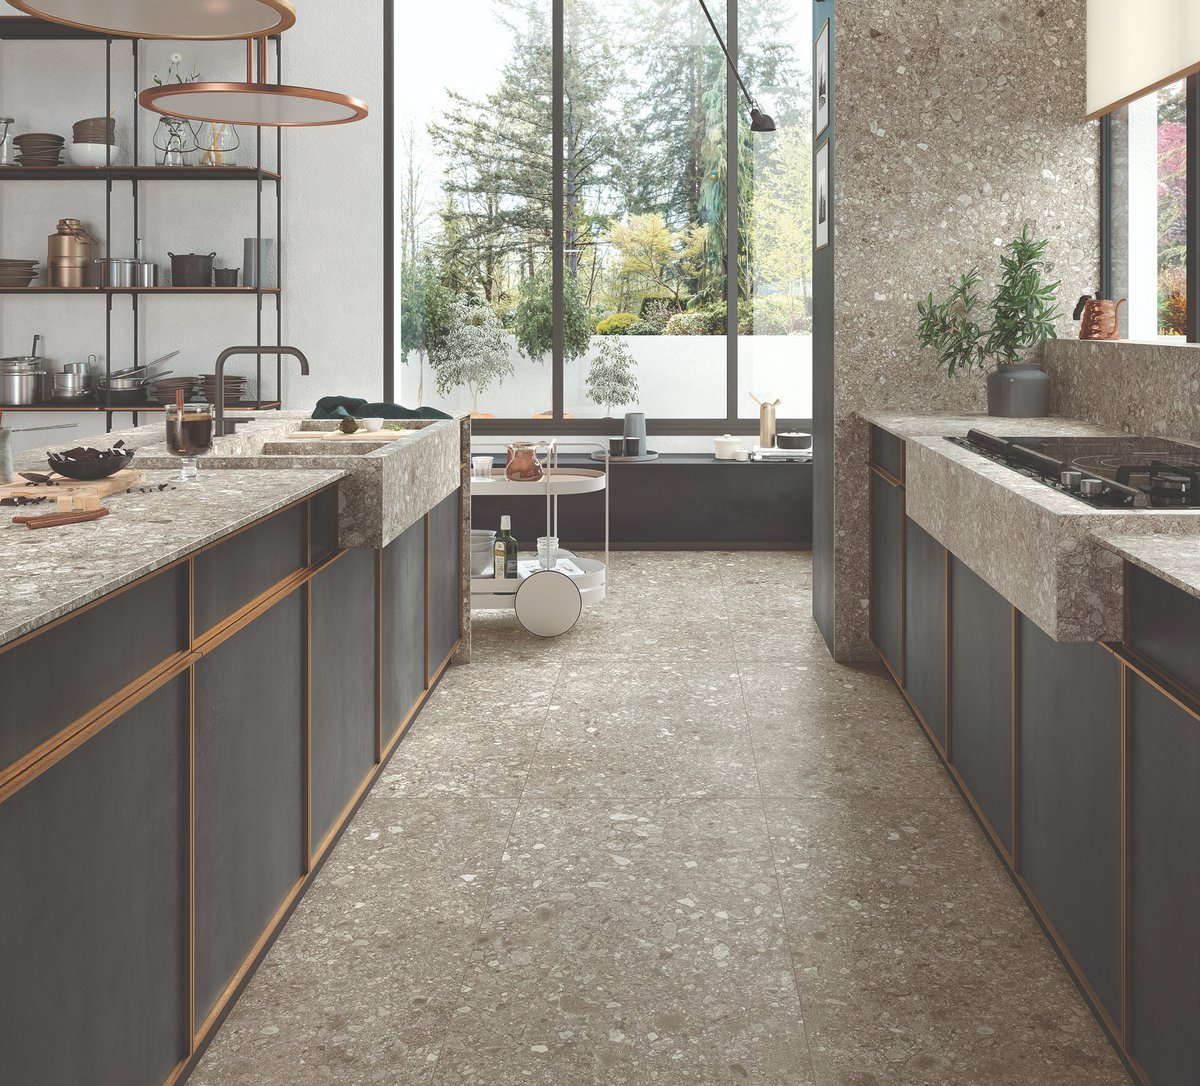 Large-format #ItalianTiles are an ideal surfacing choice for kitchens - functioning as practical, yet stylish solutions! And, unlike other options that tend to stain and change color over time, porcelain tile is fade-proof and stain resistant! #CeramicsOfItaly #WhyTile @WhyTile